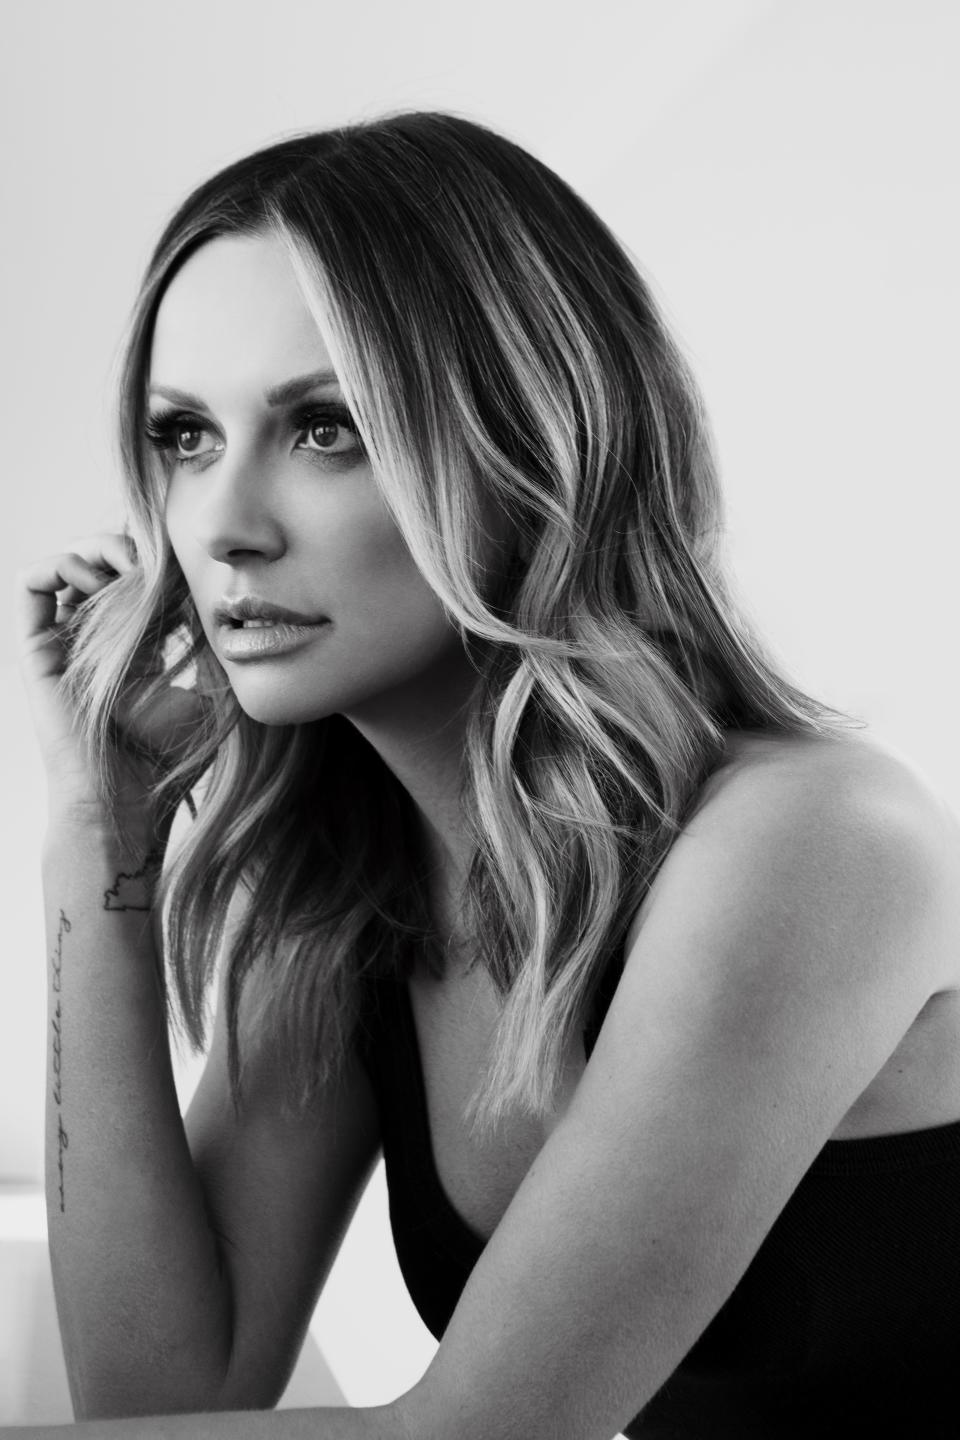 Country recording artist Carly Pearce released her new record, "29," on Feb. 19, 2021.